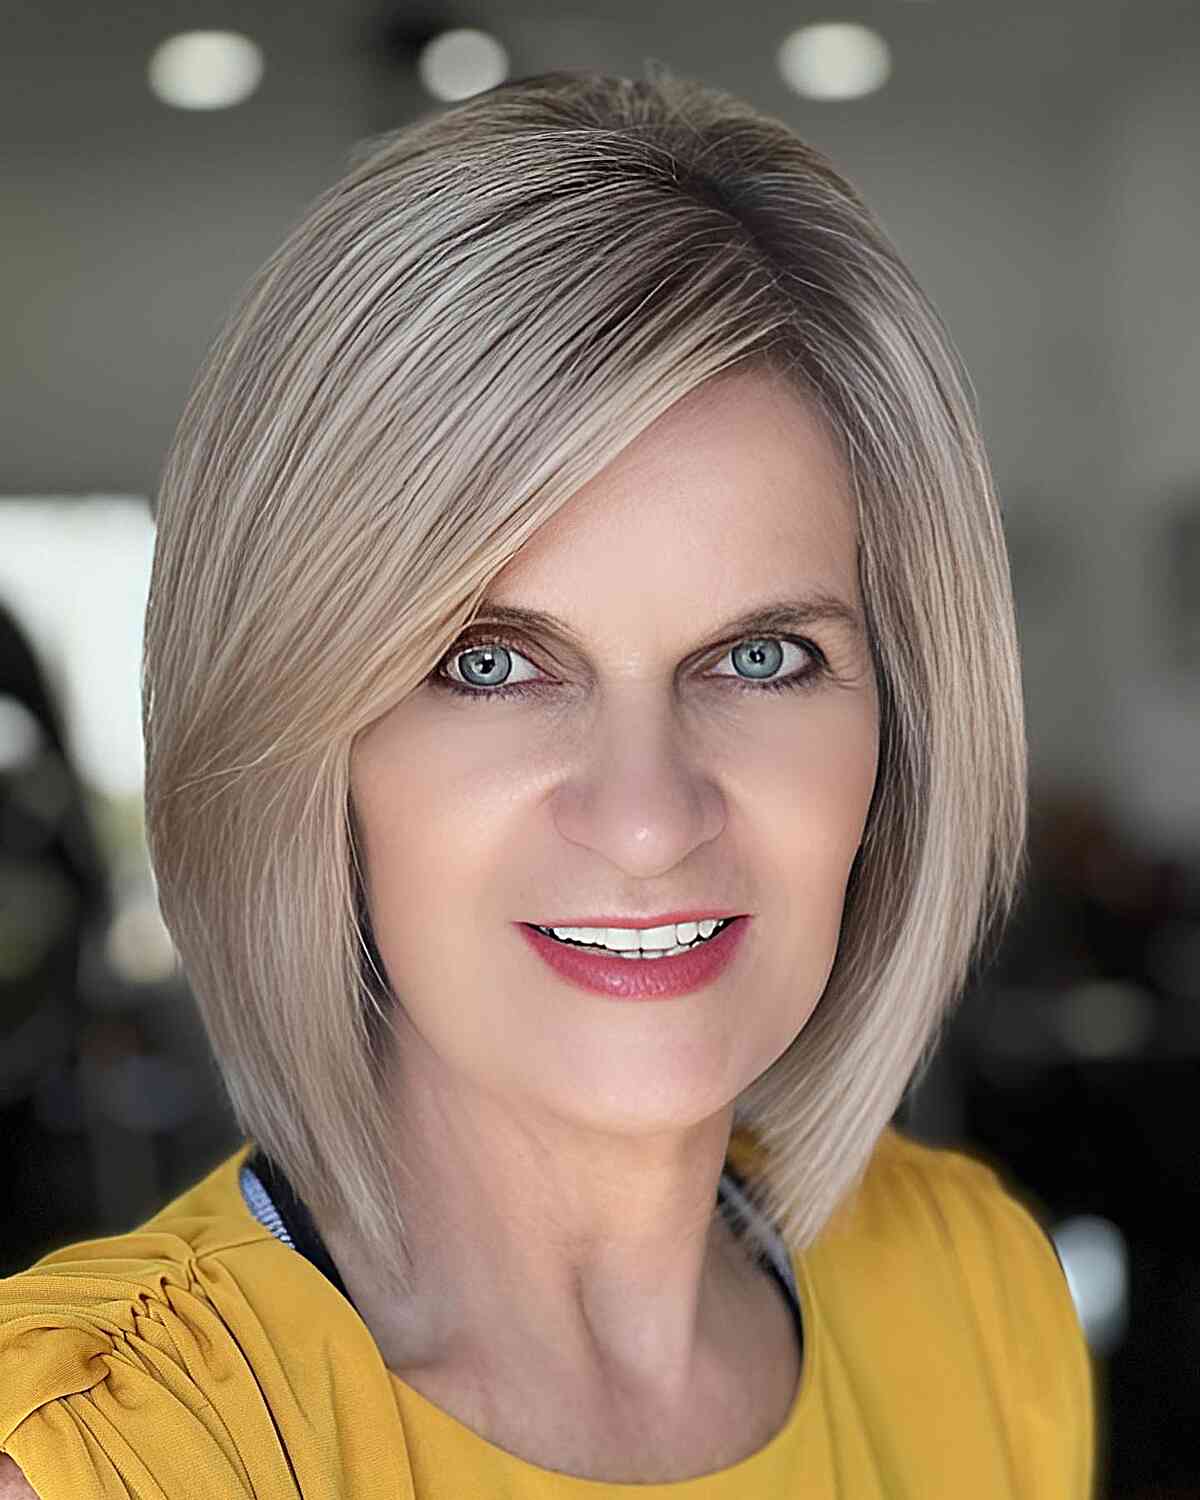 Sweeping Bangs on a Short Layered Bob for women in their 40s with thick hair